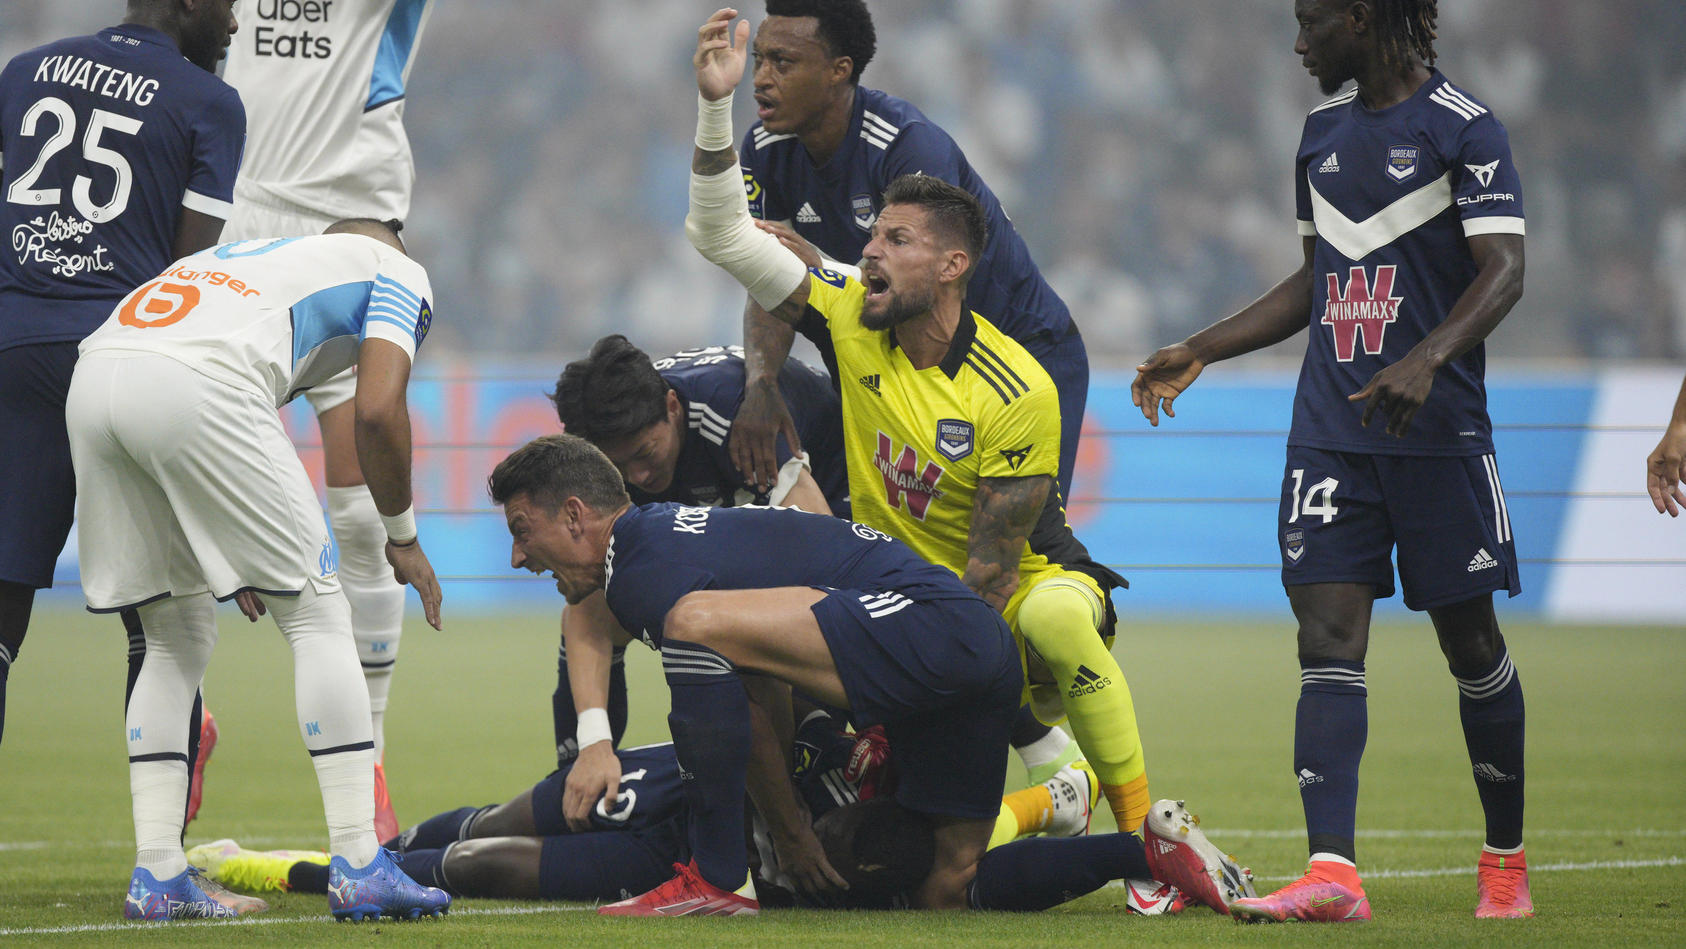 Bordeaux's Samuel Kalu lays on the pitch as players call the medic during the French League One soccer match between Marseille and Bordeaux at the Velodrome stadium in Marseille, southern France, Sunday, Aug. 15, 2021. (AP Photo/Daniel Cole)